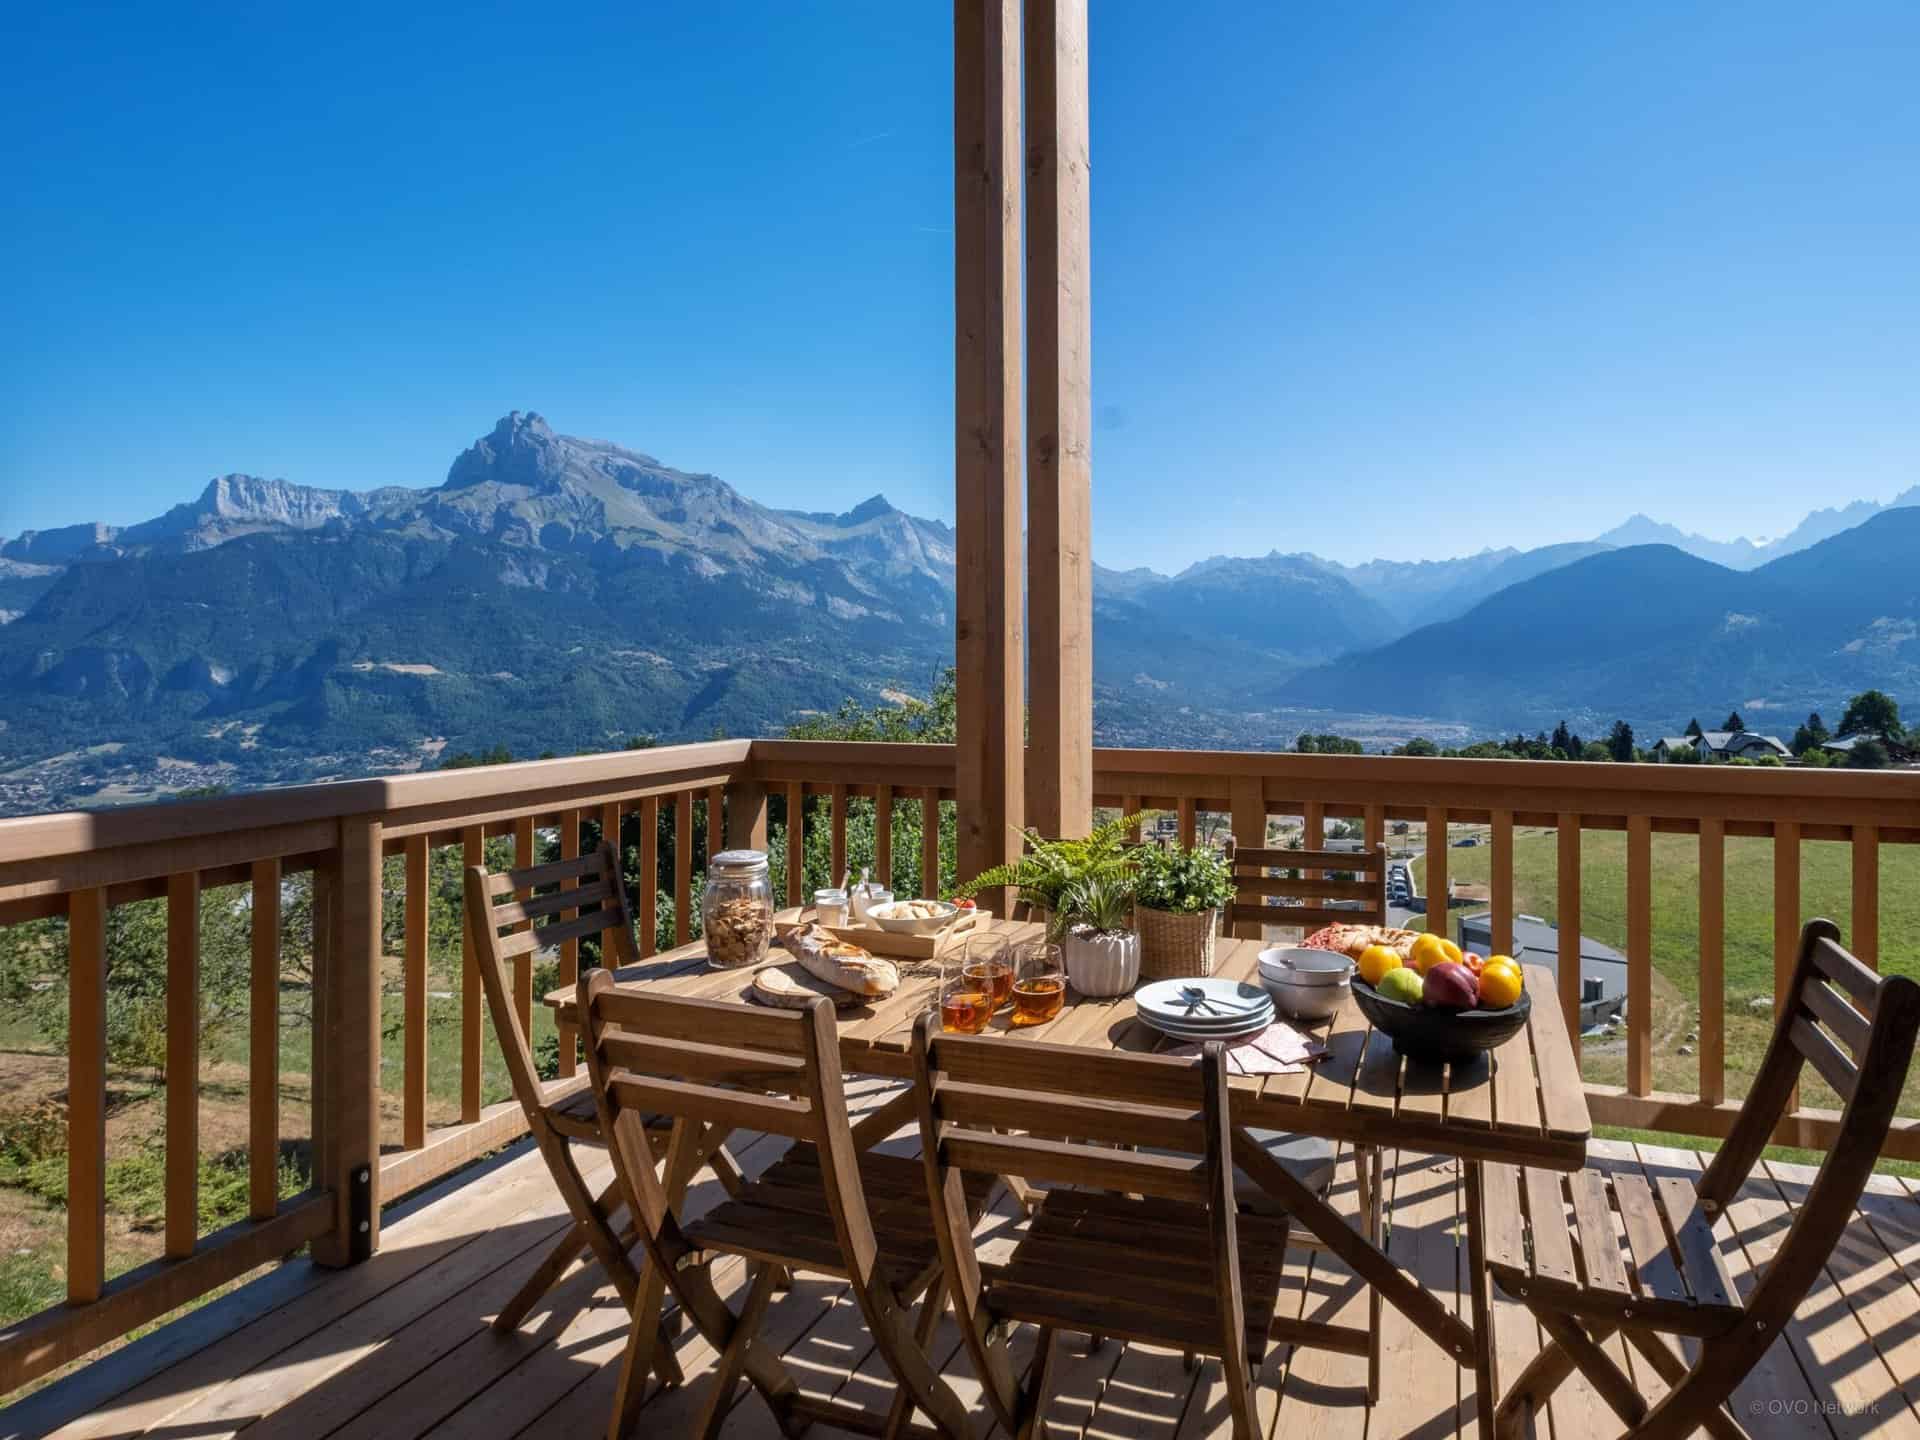 A table is laid for a meal on a sunny terrace in the mountains